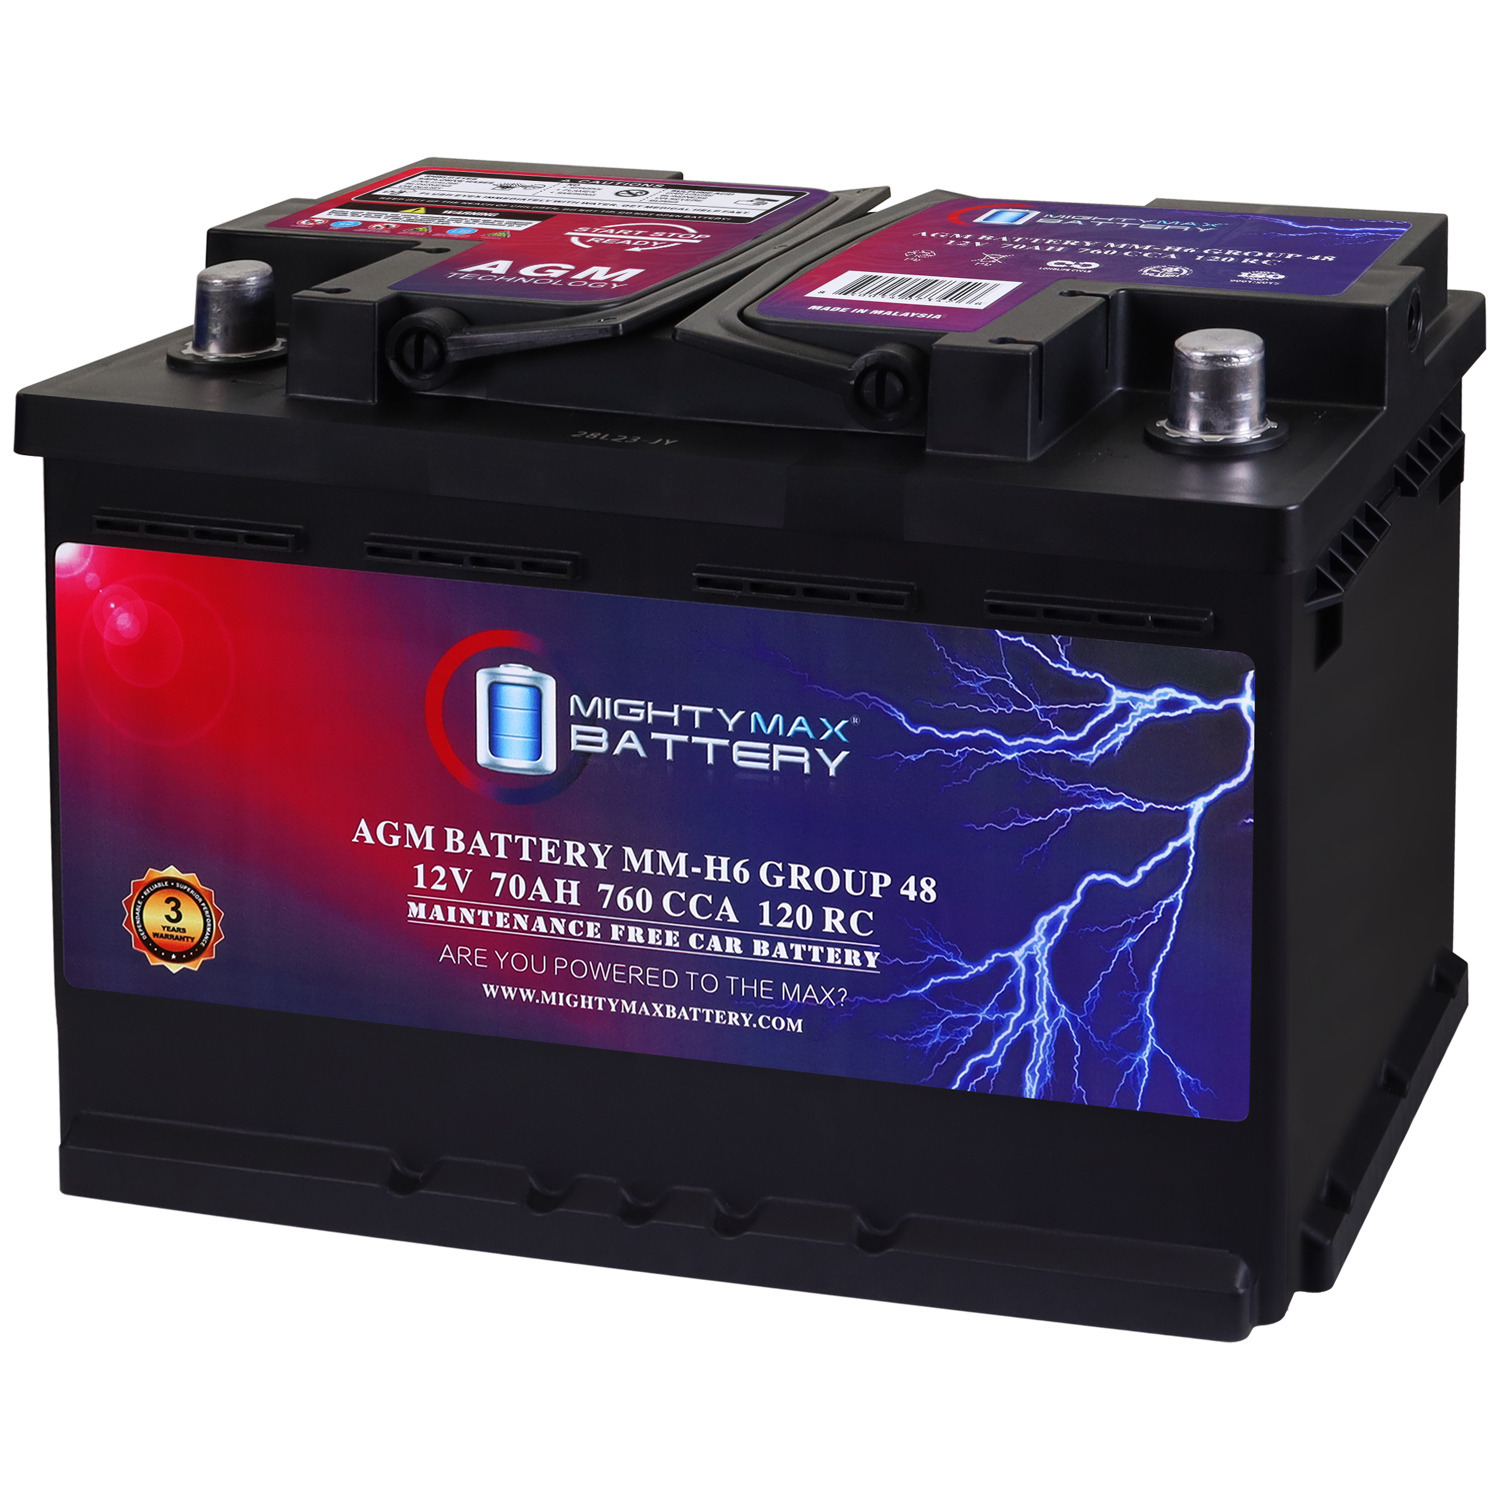 MM-H6 Group 48 12V 70AH 120RC 760CCA Replacement Battery Compatible with Acura MDX 16-20